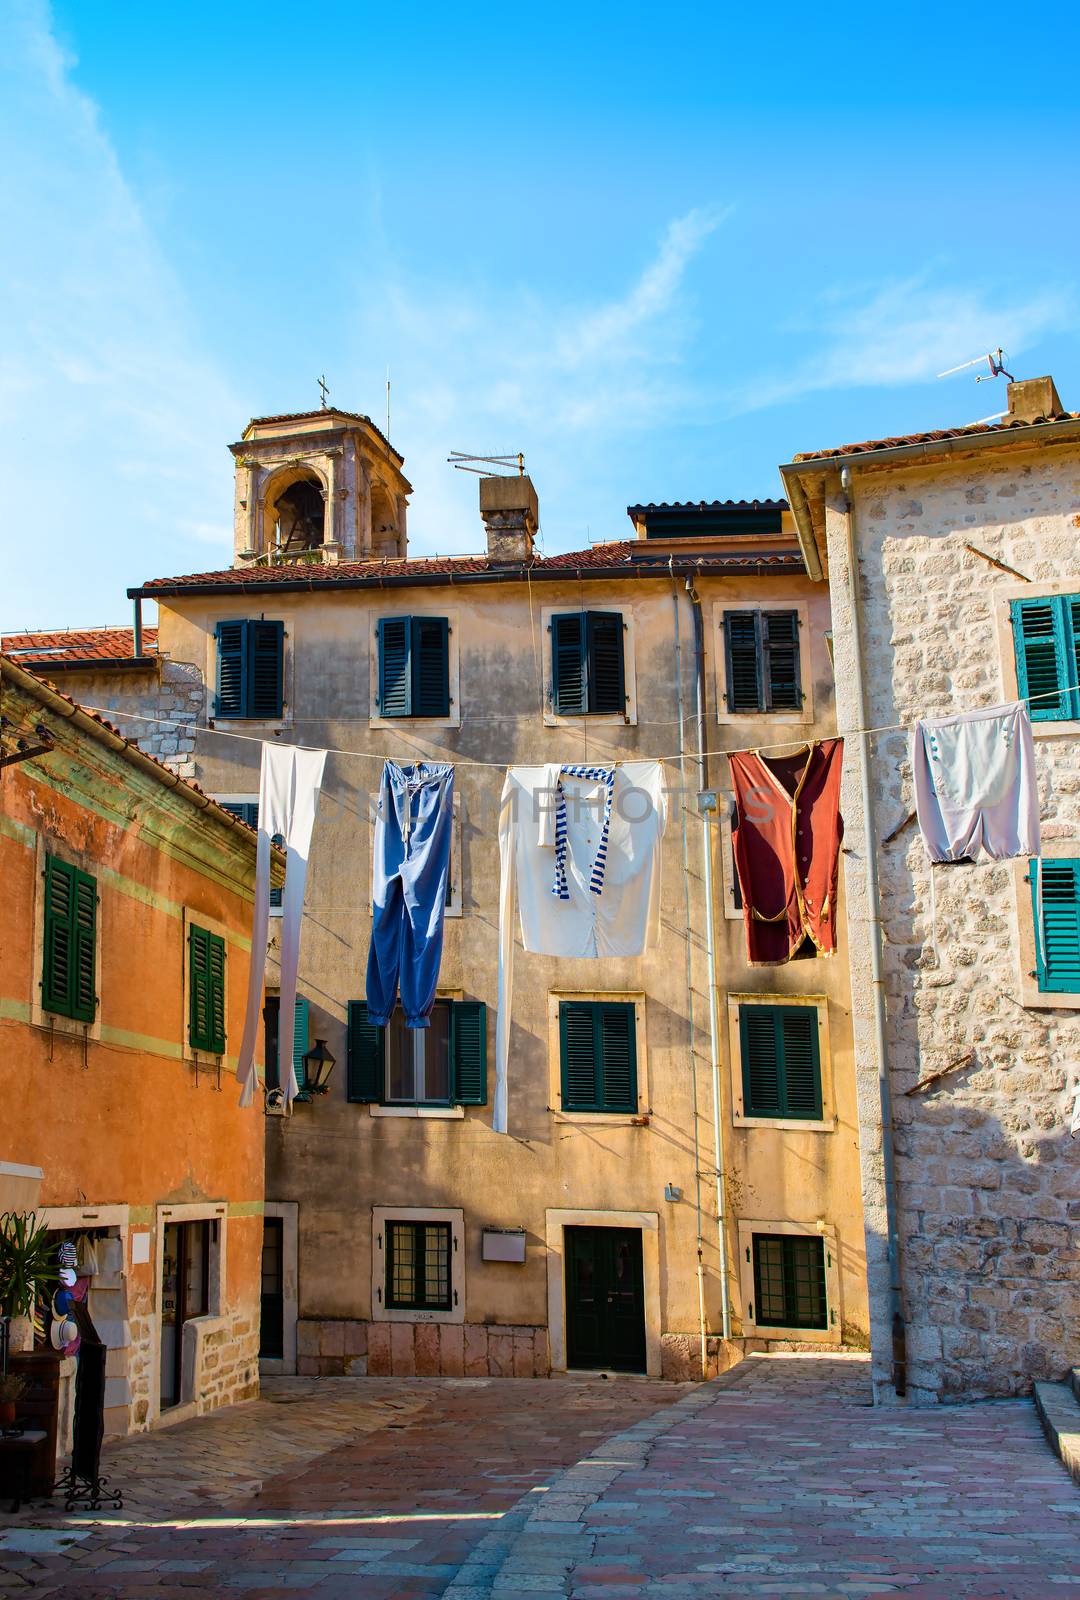 Hanging clothes hung in the old town of Kotor. Montenegro